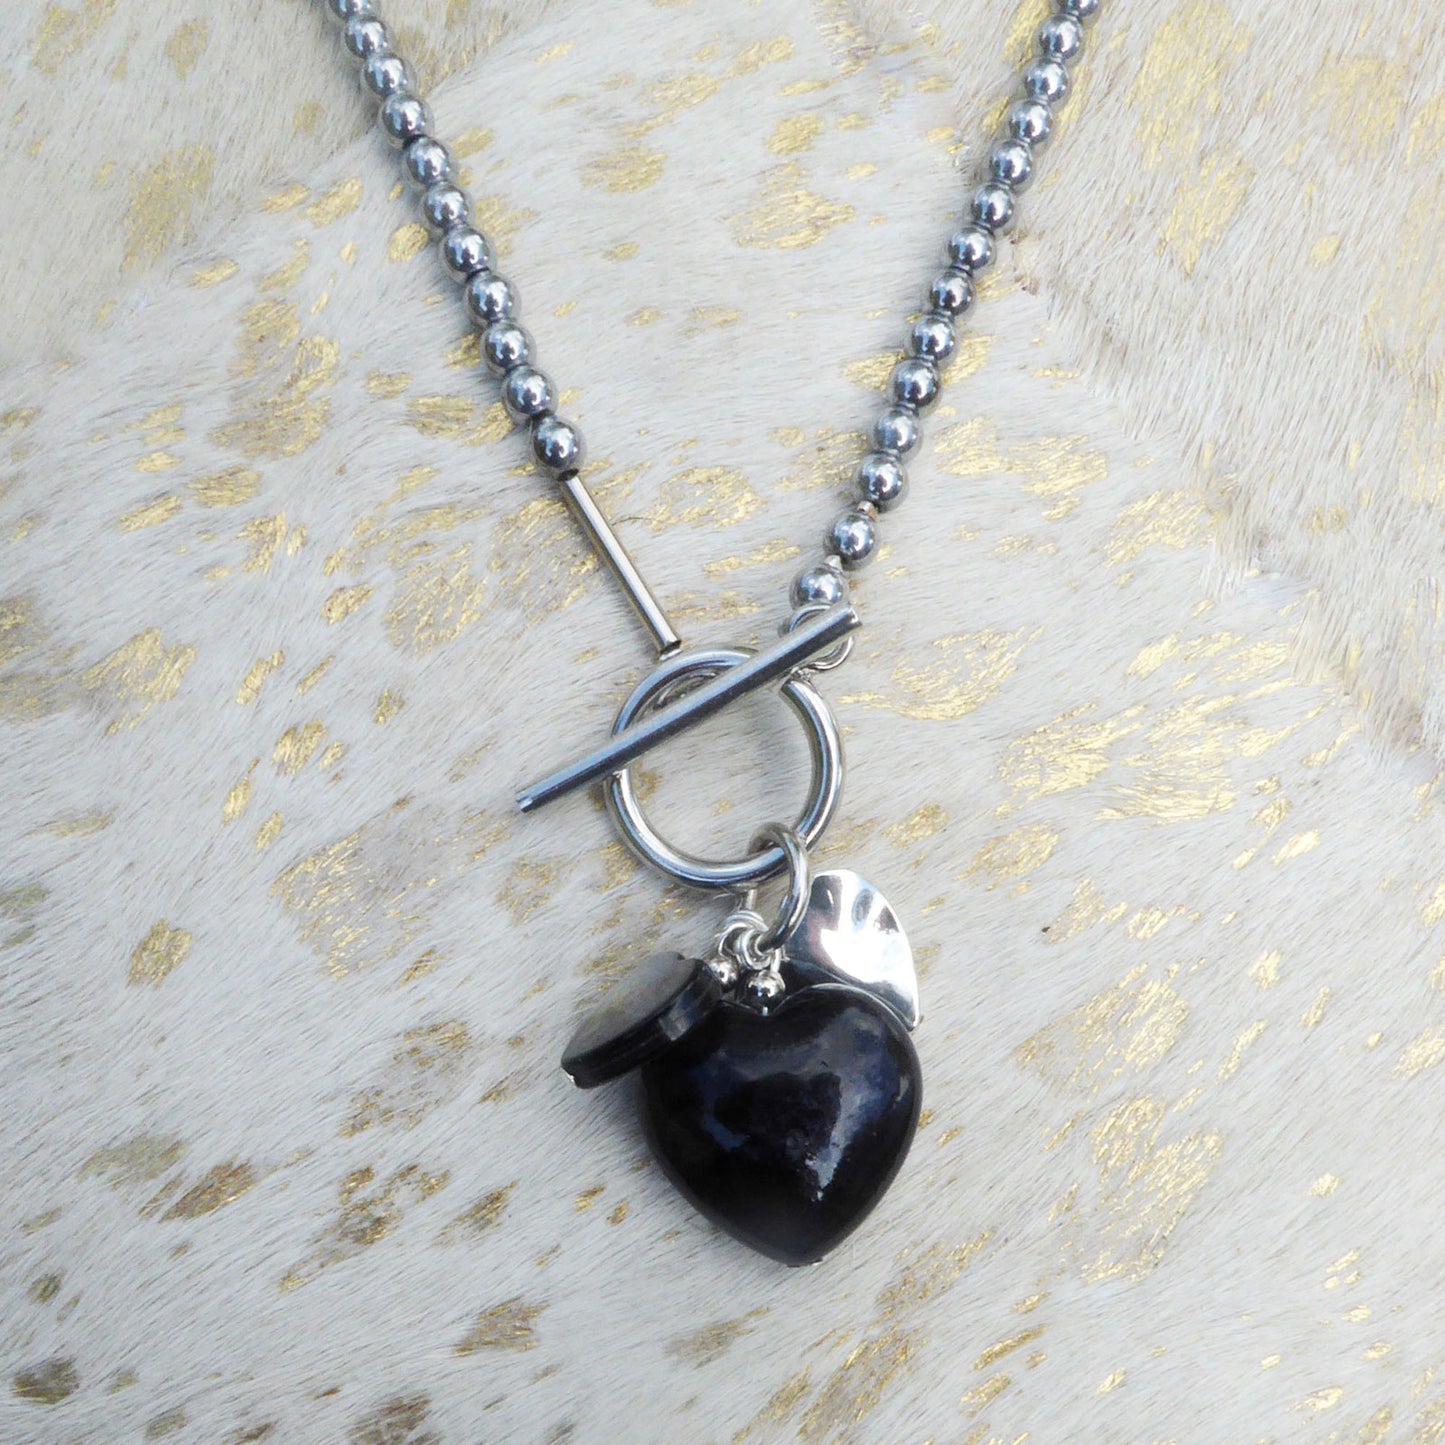 Black fossil stone charms necklace